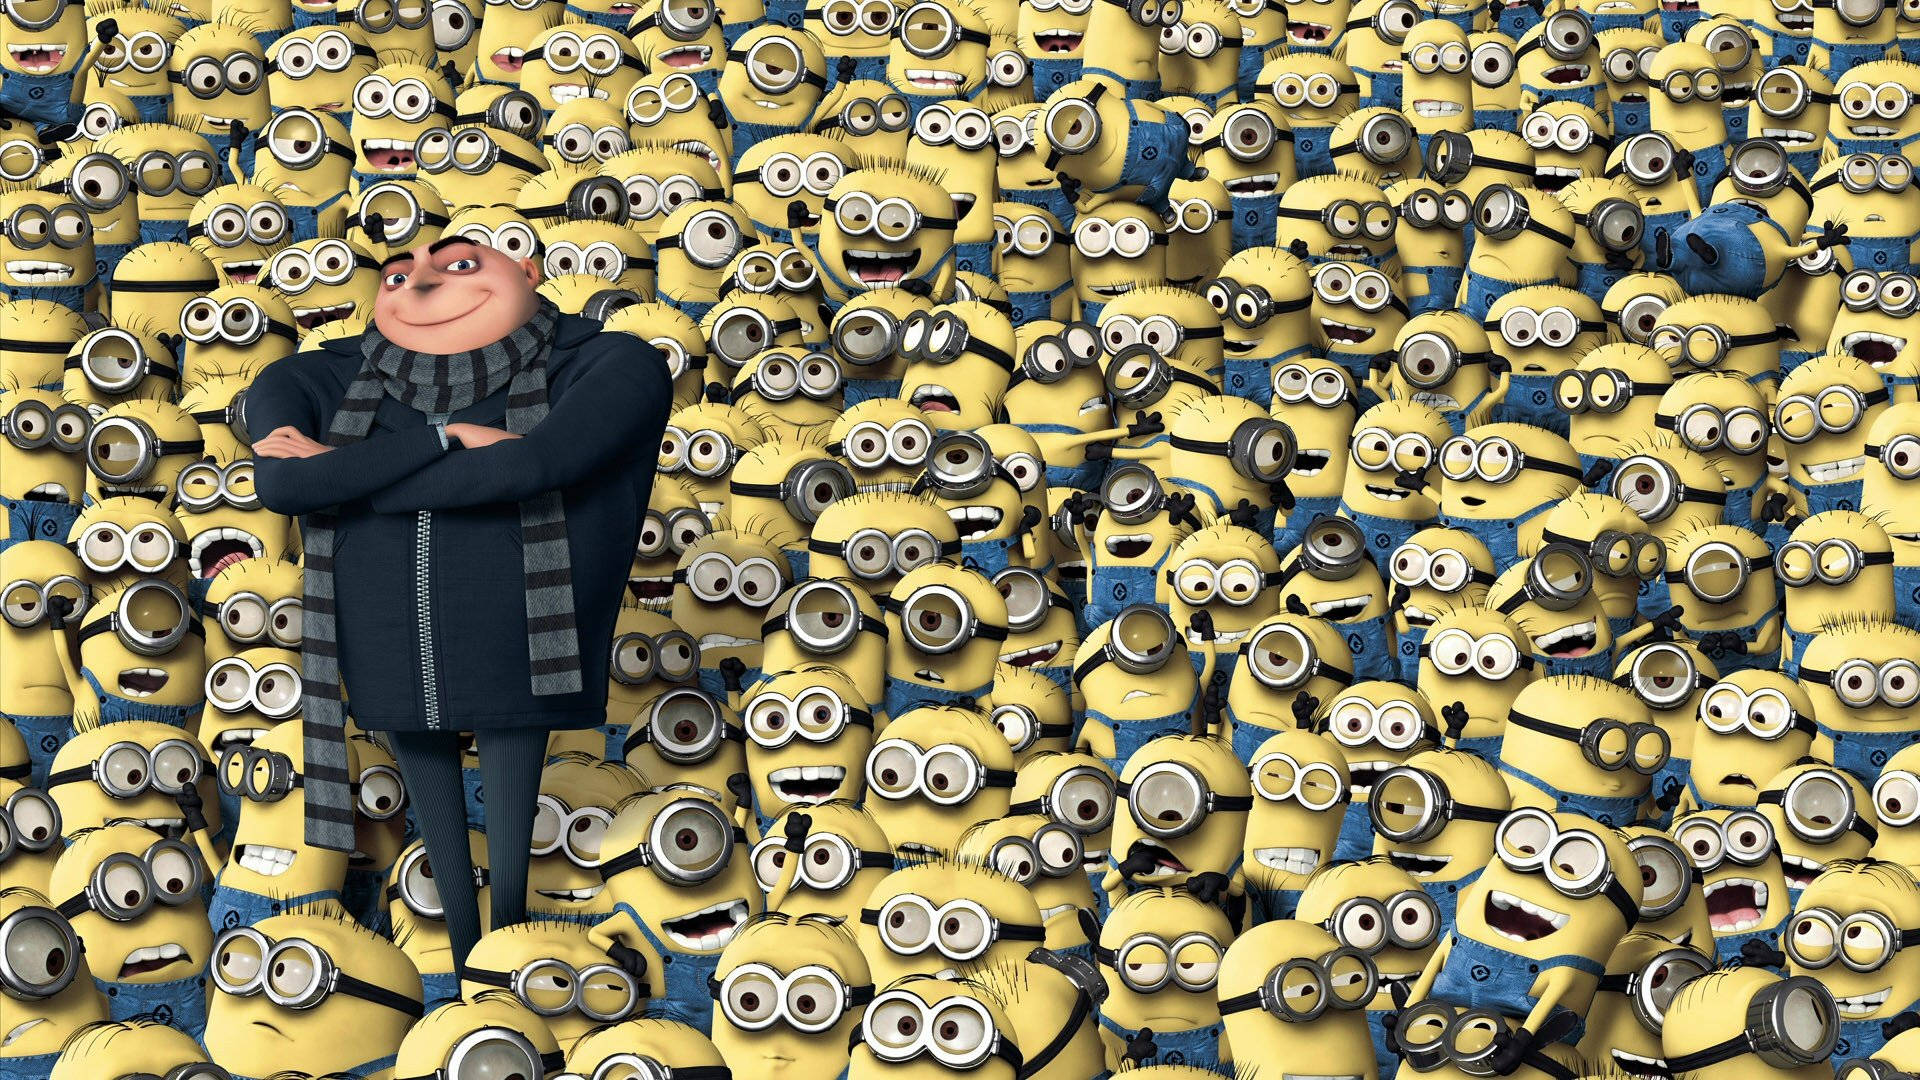 Despicable Me Gru With Minions wallpaper.